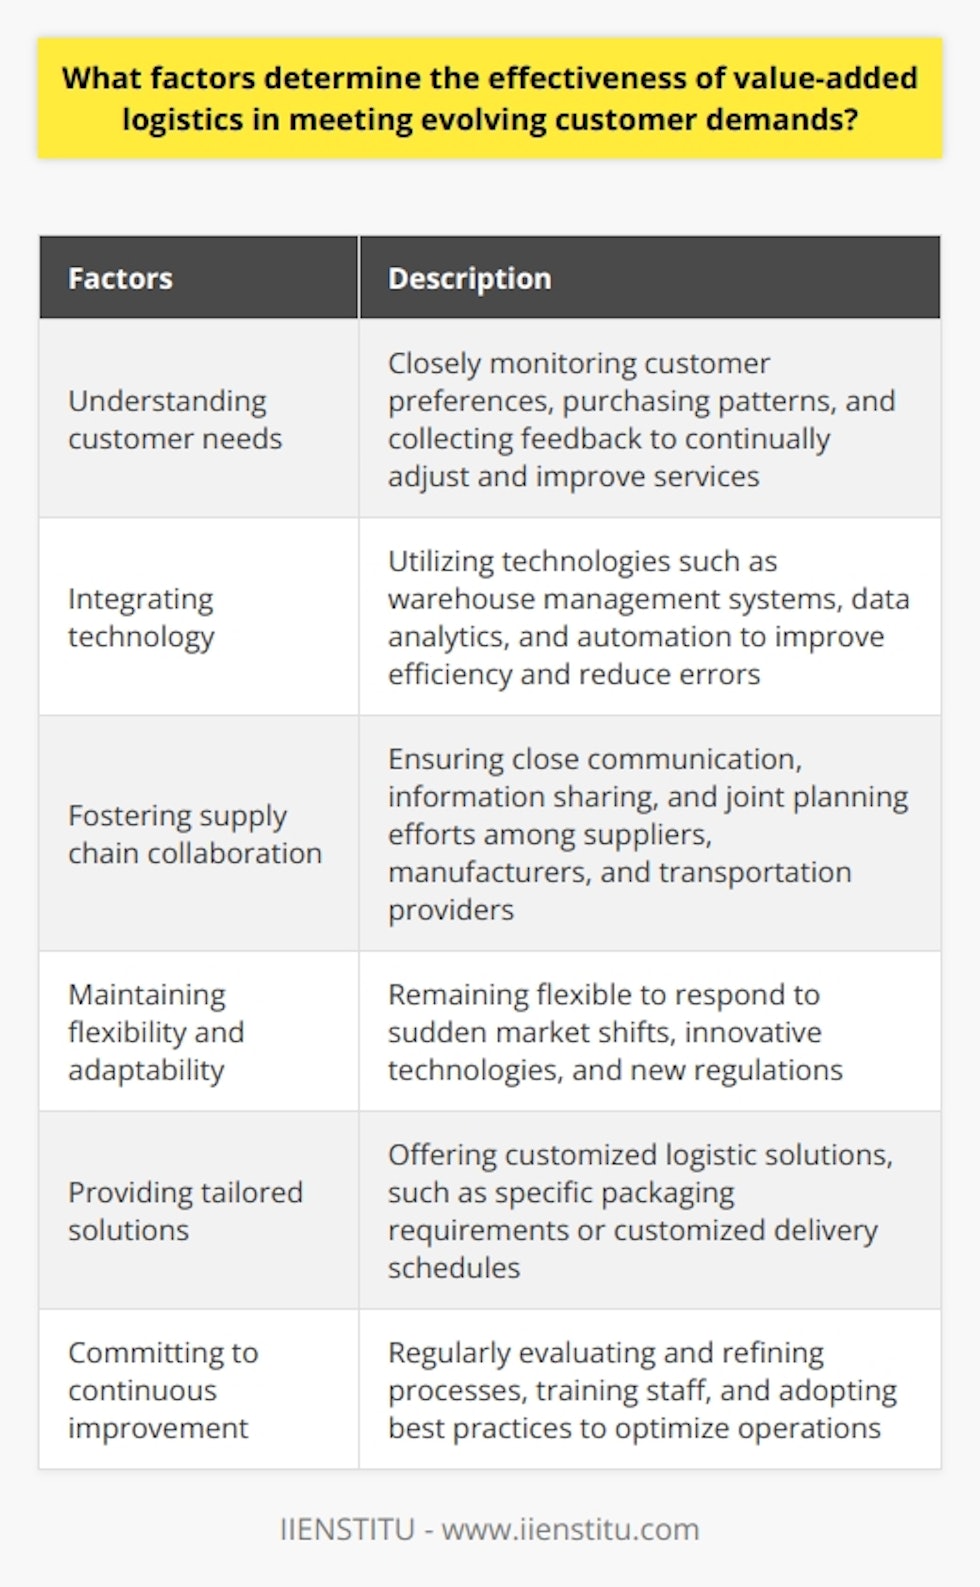 Factors that determine the effectiveness of value-added logistics in meeting evolving customer demands include understanding customer needs, integrating technology, fostering supply chain collaboration, maintaining flexibility and adaptability, providing tailored solutions, and committing to continuous improvement.One of the foremost factors is a company's ability to understand and anticipate customer needs. This involves closely monitoring customer preferences, purchasing patterns, and collecting feedback to continually adjust and improve services. By staying attuned to customer demands, businesses can better align their value-added logistics to meet evolving needs.The integration of technology is also crucial in enhancing logistical processes. Technologies such as warehouse management systems, data analytics, and automation can significantly improve efficiency and reduce errors. These advancements enable businesses to respond more effectively to changing customer demands by streamlining operations and offering more accurate and timely services.Effective collaboration throughout the supply chain is essential in ensuring the timely and accurate delivery of value-added logistic services. Close communication, information sharing, and joint planning efforts among suppliers, manufacturers, and transportation providers can lead to improved coordination and streamlined operations. By fostering collaboration and shared goals, businesses can adapt to evolving customer demands more effectively.In a constantly changing business environment, the ability to quickly adapt and modify value-added logistic services is crucial. Companies must remain flexible and adaptable to respond to sudden market shifts, innovative technologies, and new regulations. This flexibility allows businesses to maintain their competitive edge and meet customer demands for tailored and responsive services.Providing customized logistic solutions is another essential factor in meeting evolving customer demands. Personalized services, such as specific packaging requirements or customized delivery schedules, can result in increased customer satisfaction and brand loyalty. By tailoring their services to individual customer needs, businesses can ensure that their value-added logistics meet evolving demands.A commitment to continuous improvement is vital to the effectiveness of value-added logistics. By regularly evaluating and refining processes, training staff, and adopting best practices, businesses can optimize their operations and better serve customers. Embracing a culture of continuous improvement allows companies to stay ahead of customer demands and adapt their value-added logistics accordingly.In conclusion, the effectiveness of value-added logistics in meeting evolving customer demands depends on understanding customer needs, integrating technology, fostering supply chain collaboration, maintaining flexibility and adaptability, providing tailored solutions, and committing to continuous improvement. By addressing these crucial factors, businesses can enhance their value-added logistic services and better meet the ever-changing needs of their customers.